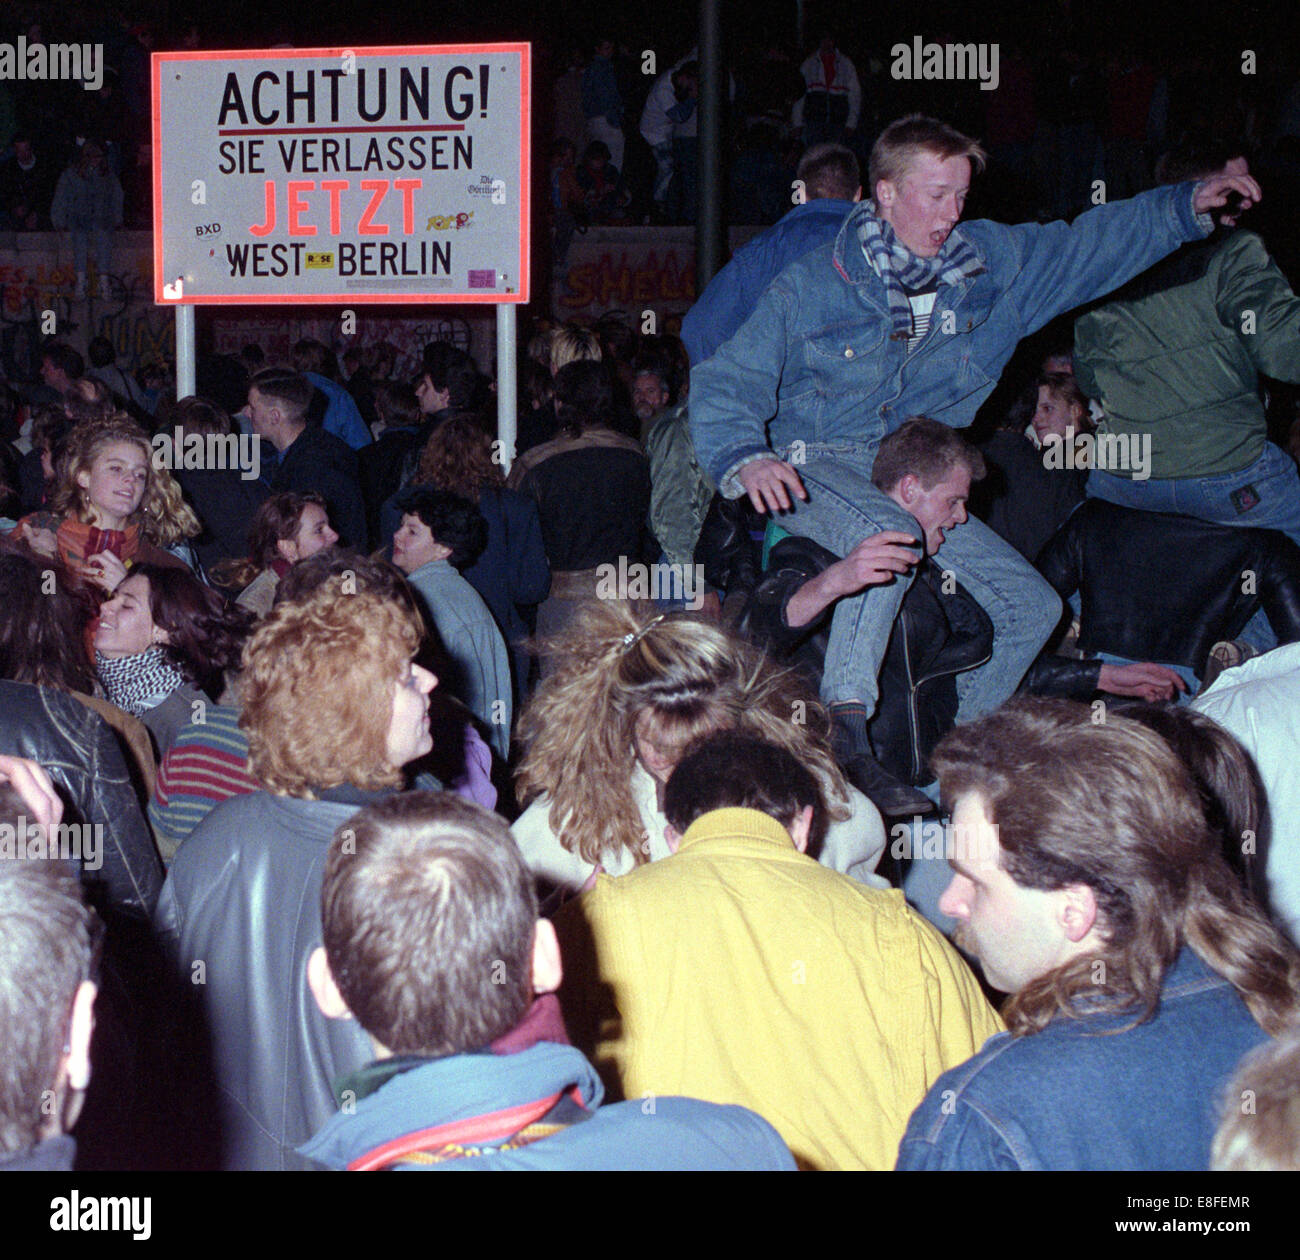 One day after the opening of the border, thousands of people celebrate on, in front of and behind Berlin Wall at Brandenburg Gate in Berlin on 10 November 1989 (western side). The inner-German border which had separated the country since 1961 practically ceased to exist.The sign in the picture reads 'Attention,you are leaving West-Berlin'. Photo: Peter Zimmermann Stock Photo